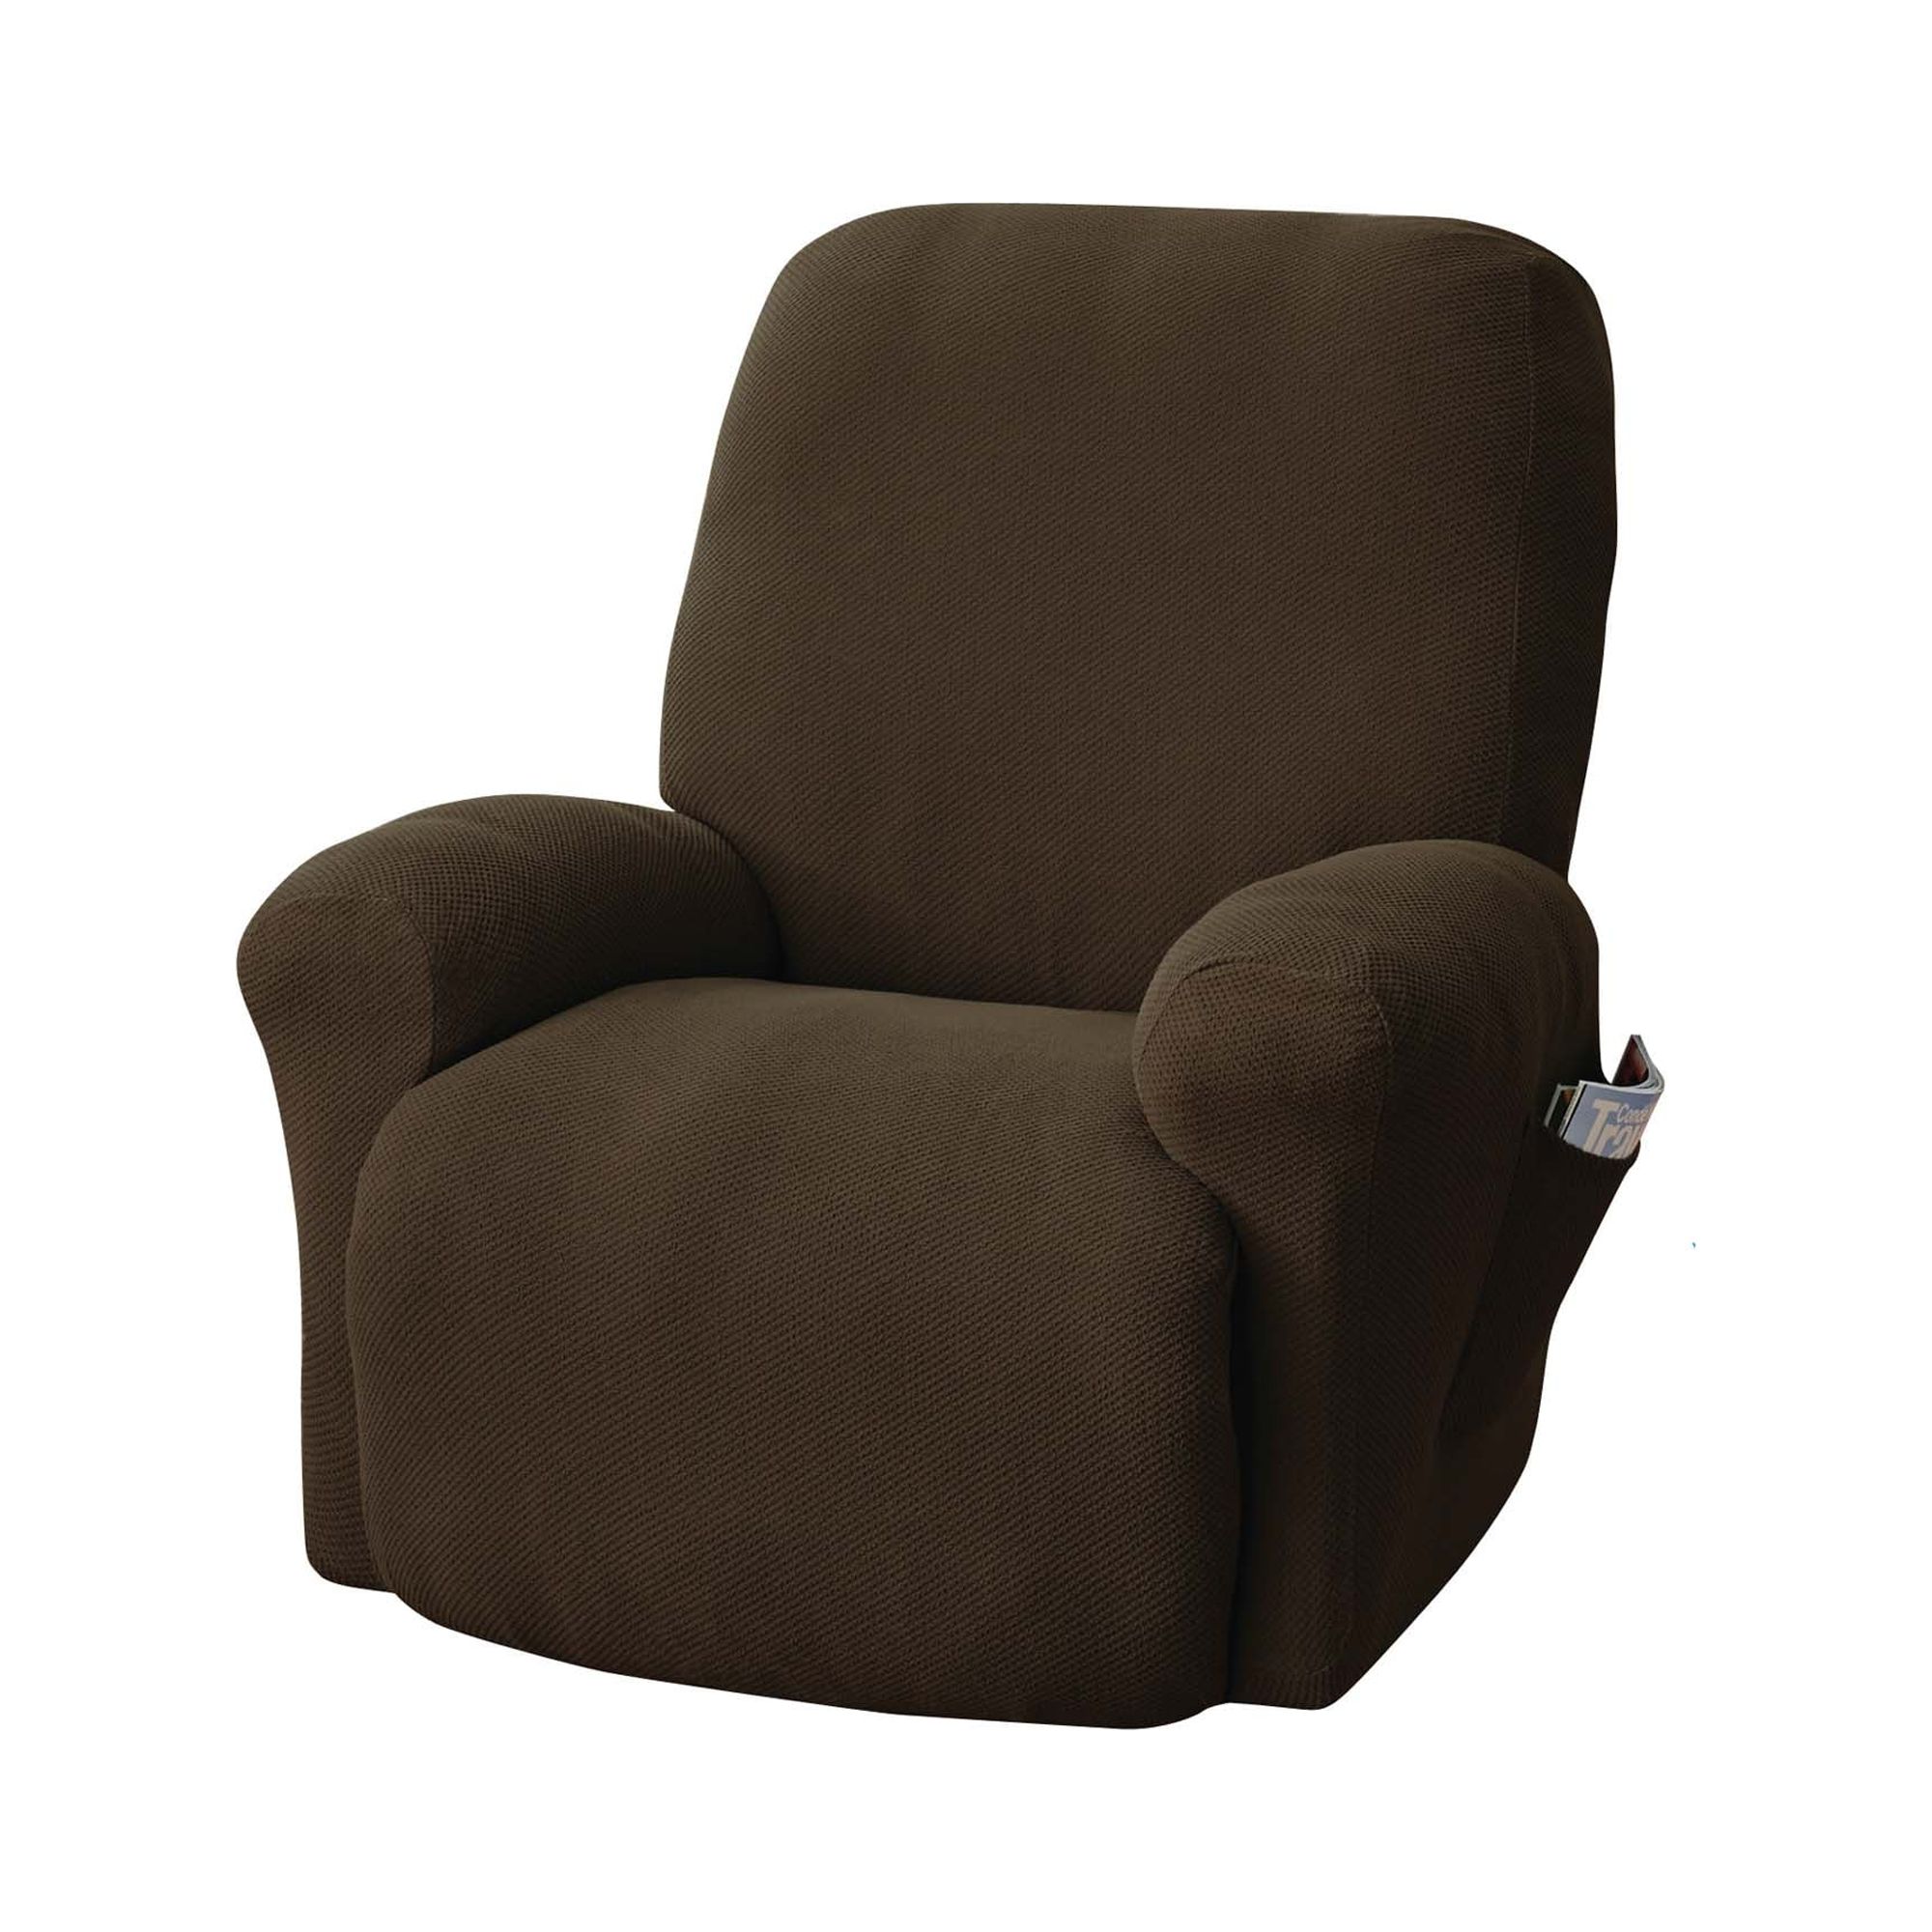 Mainstays Recliner Pixel Stretch Fabric Slipcover, Brown, 4-Piece - image 1 of 7